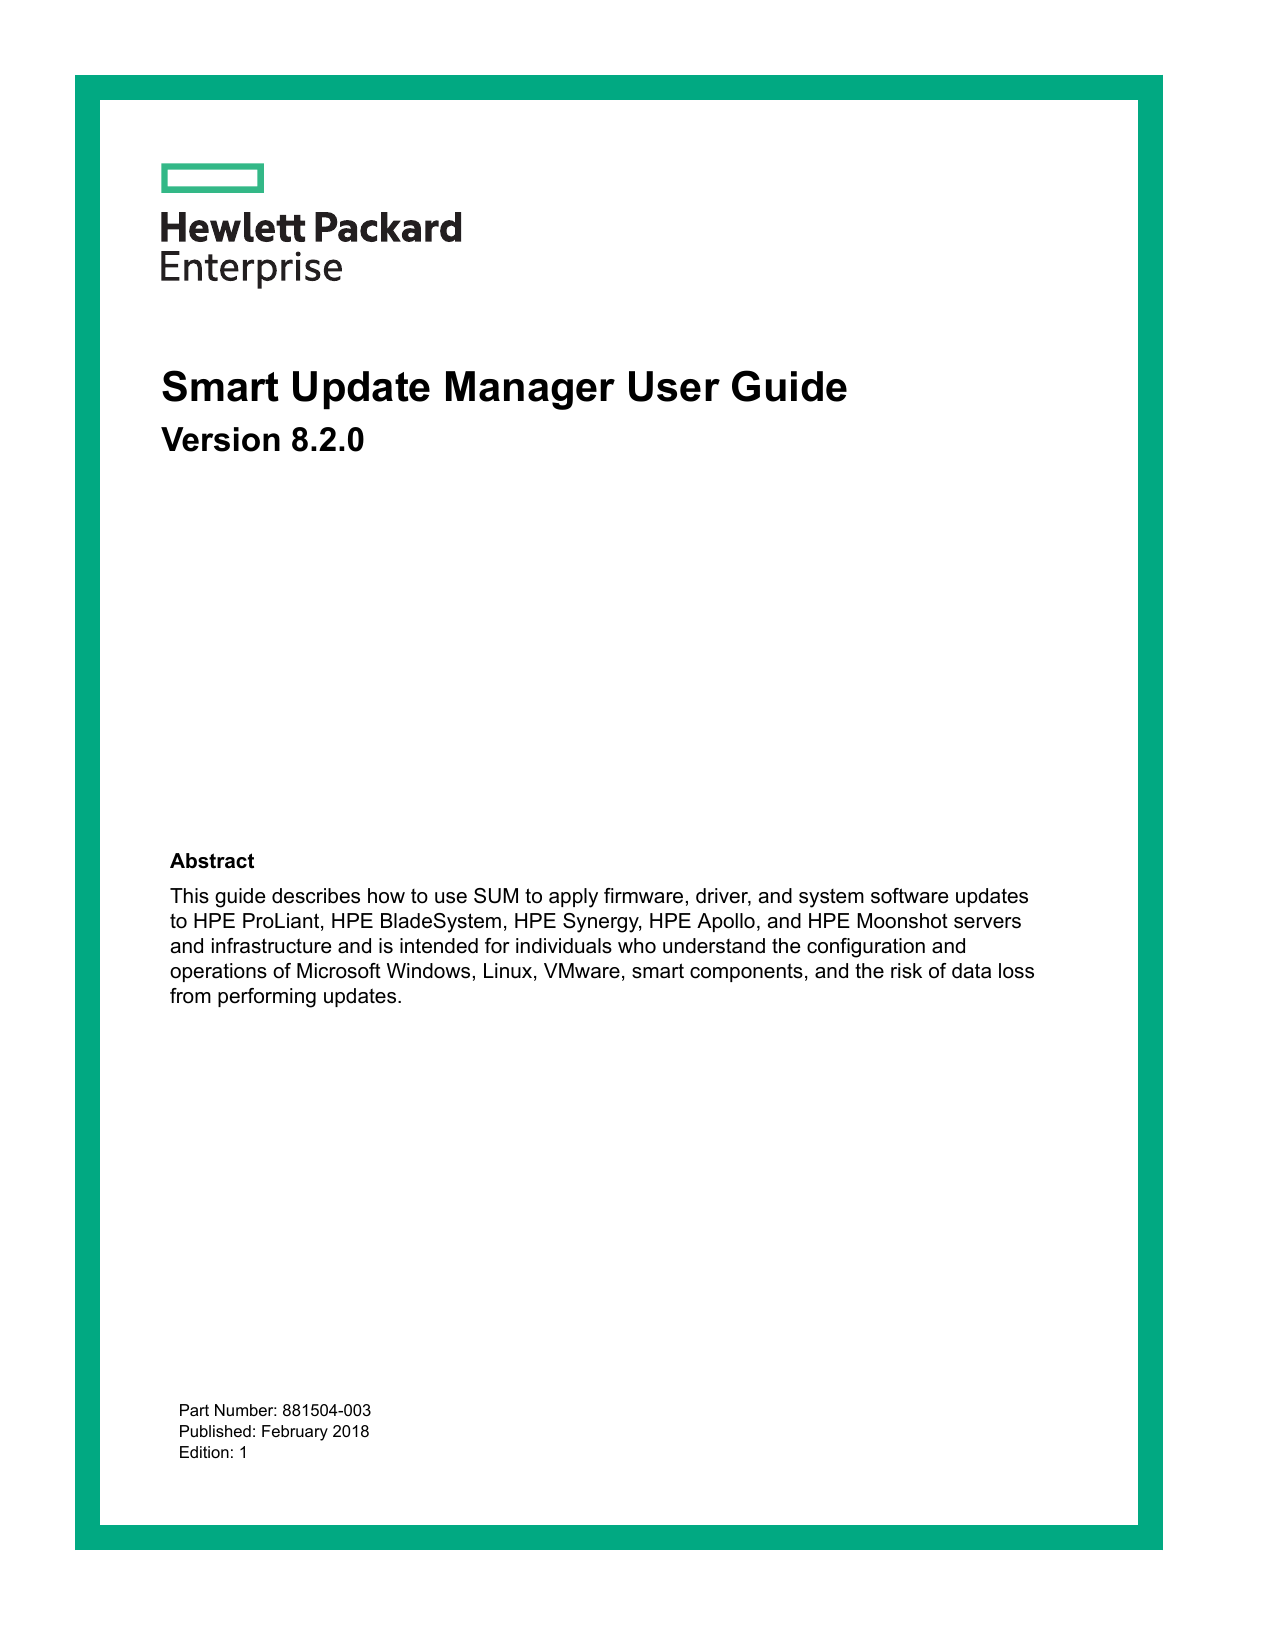 Smart Update Manager User Guide Manualzz